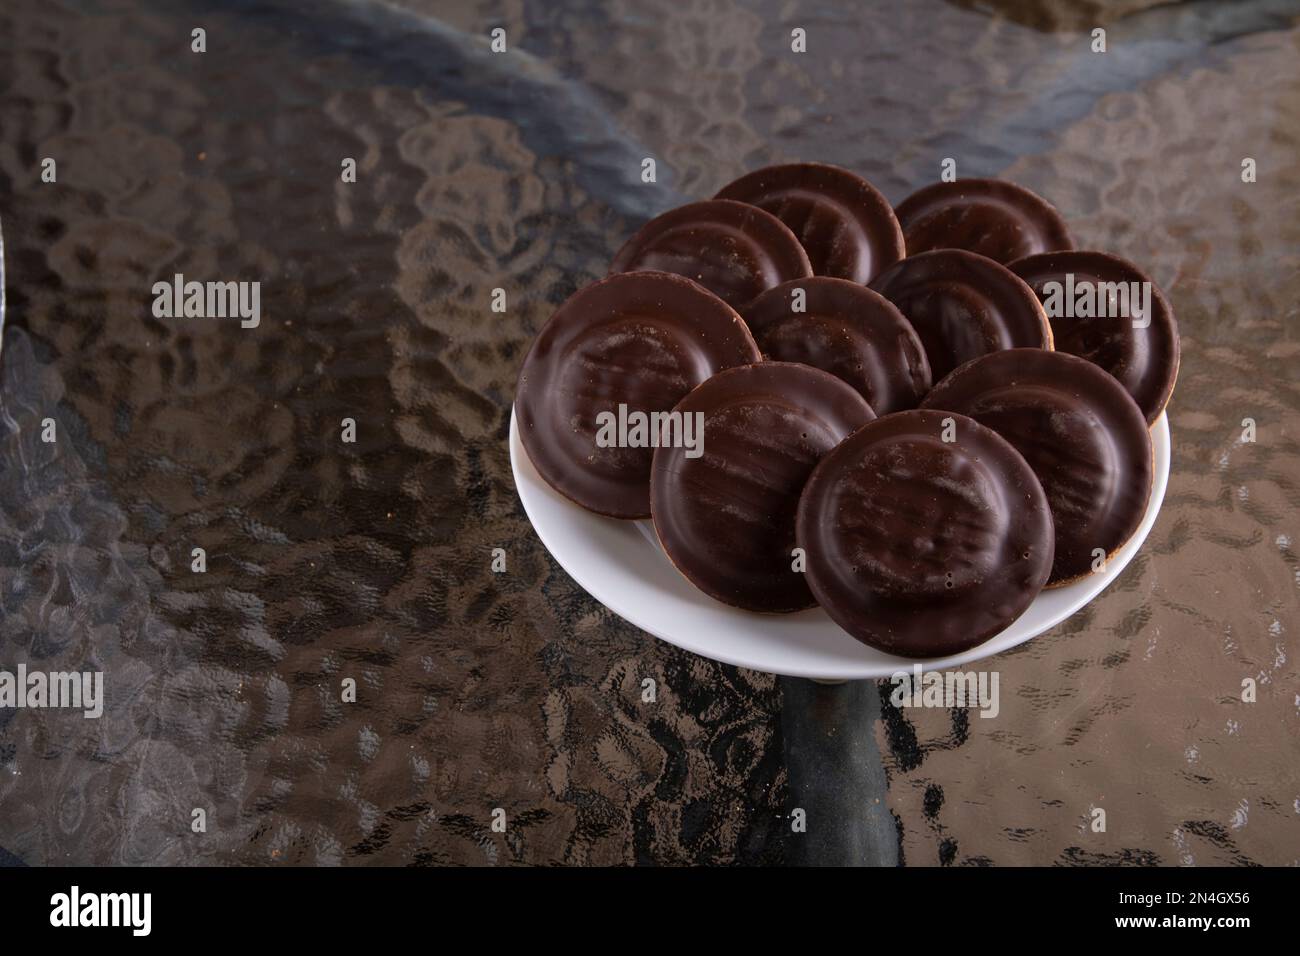 photo of a plate of chocolate chip cookies on a glass table Stock Photo